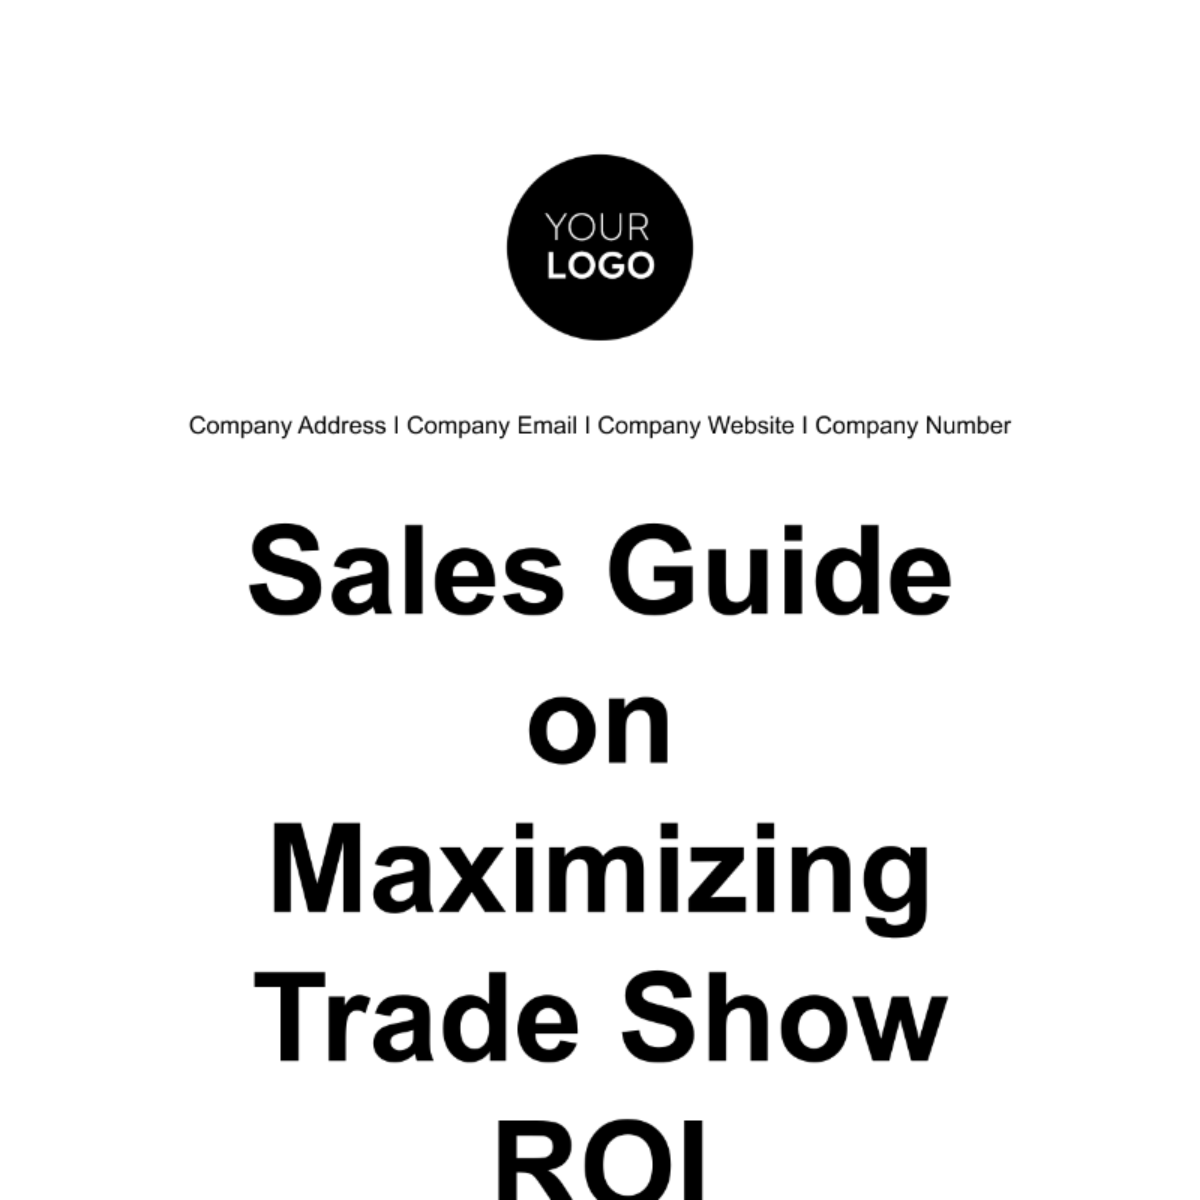 Free Sales Guide on Maximizing Trade Show ROI Template